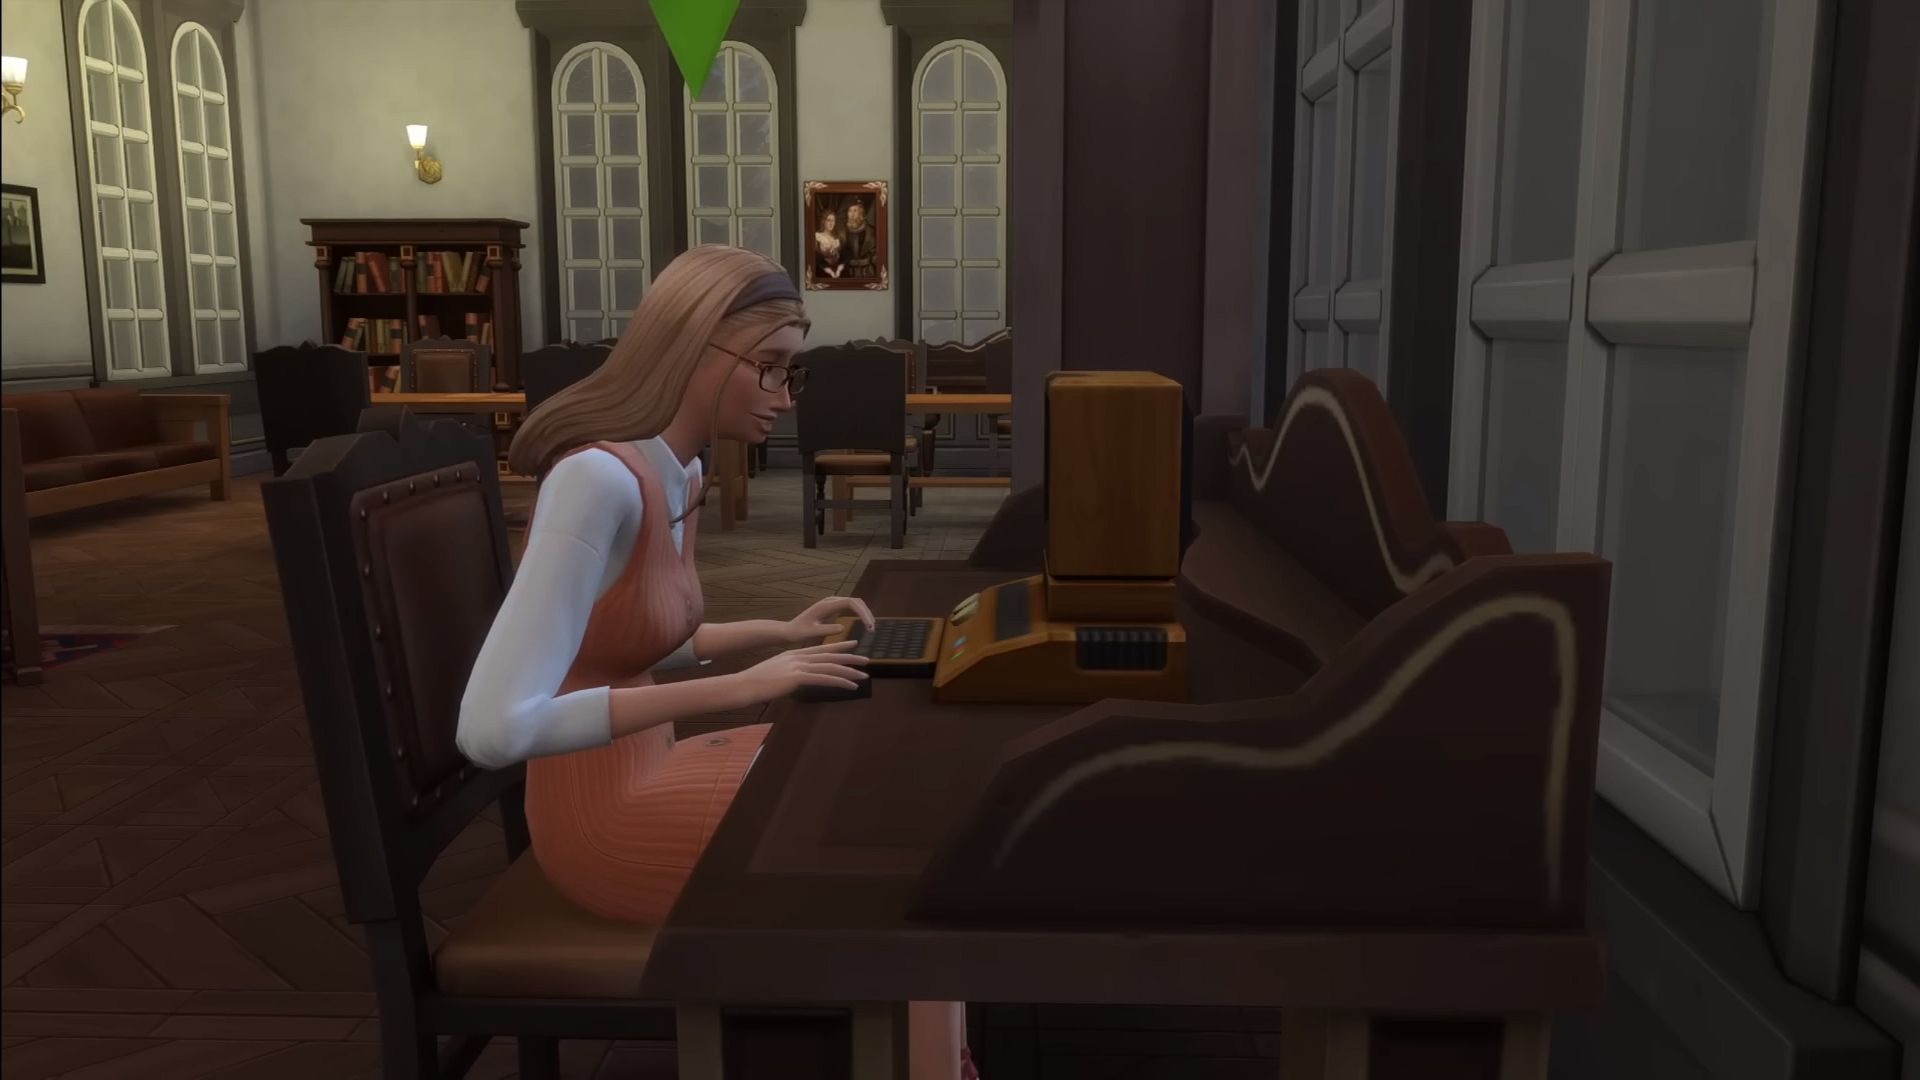 Sims 4: Where to Find the Research Archive Machine and How to Use It